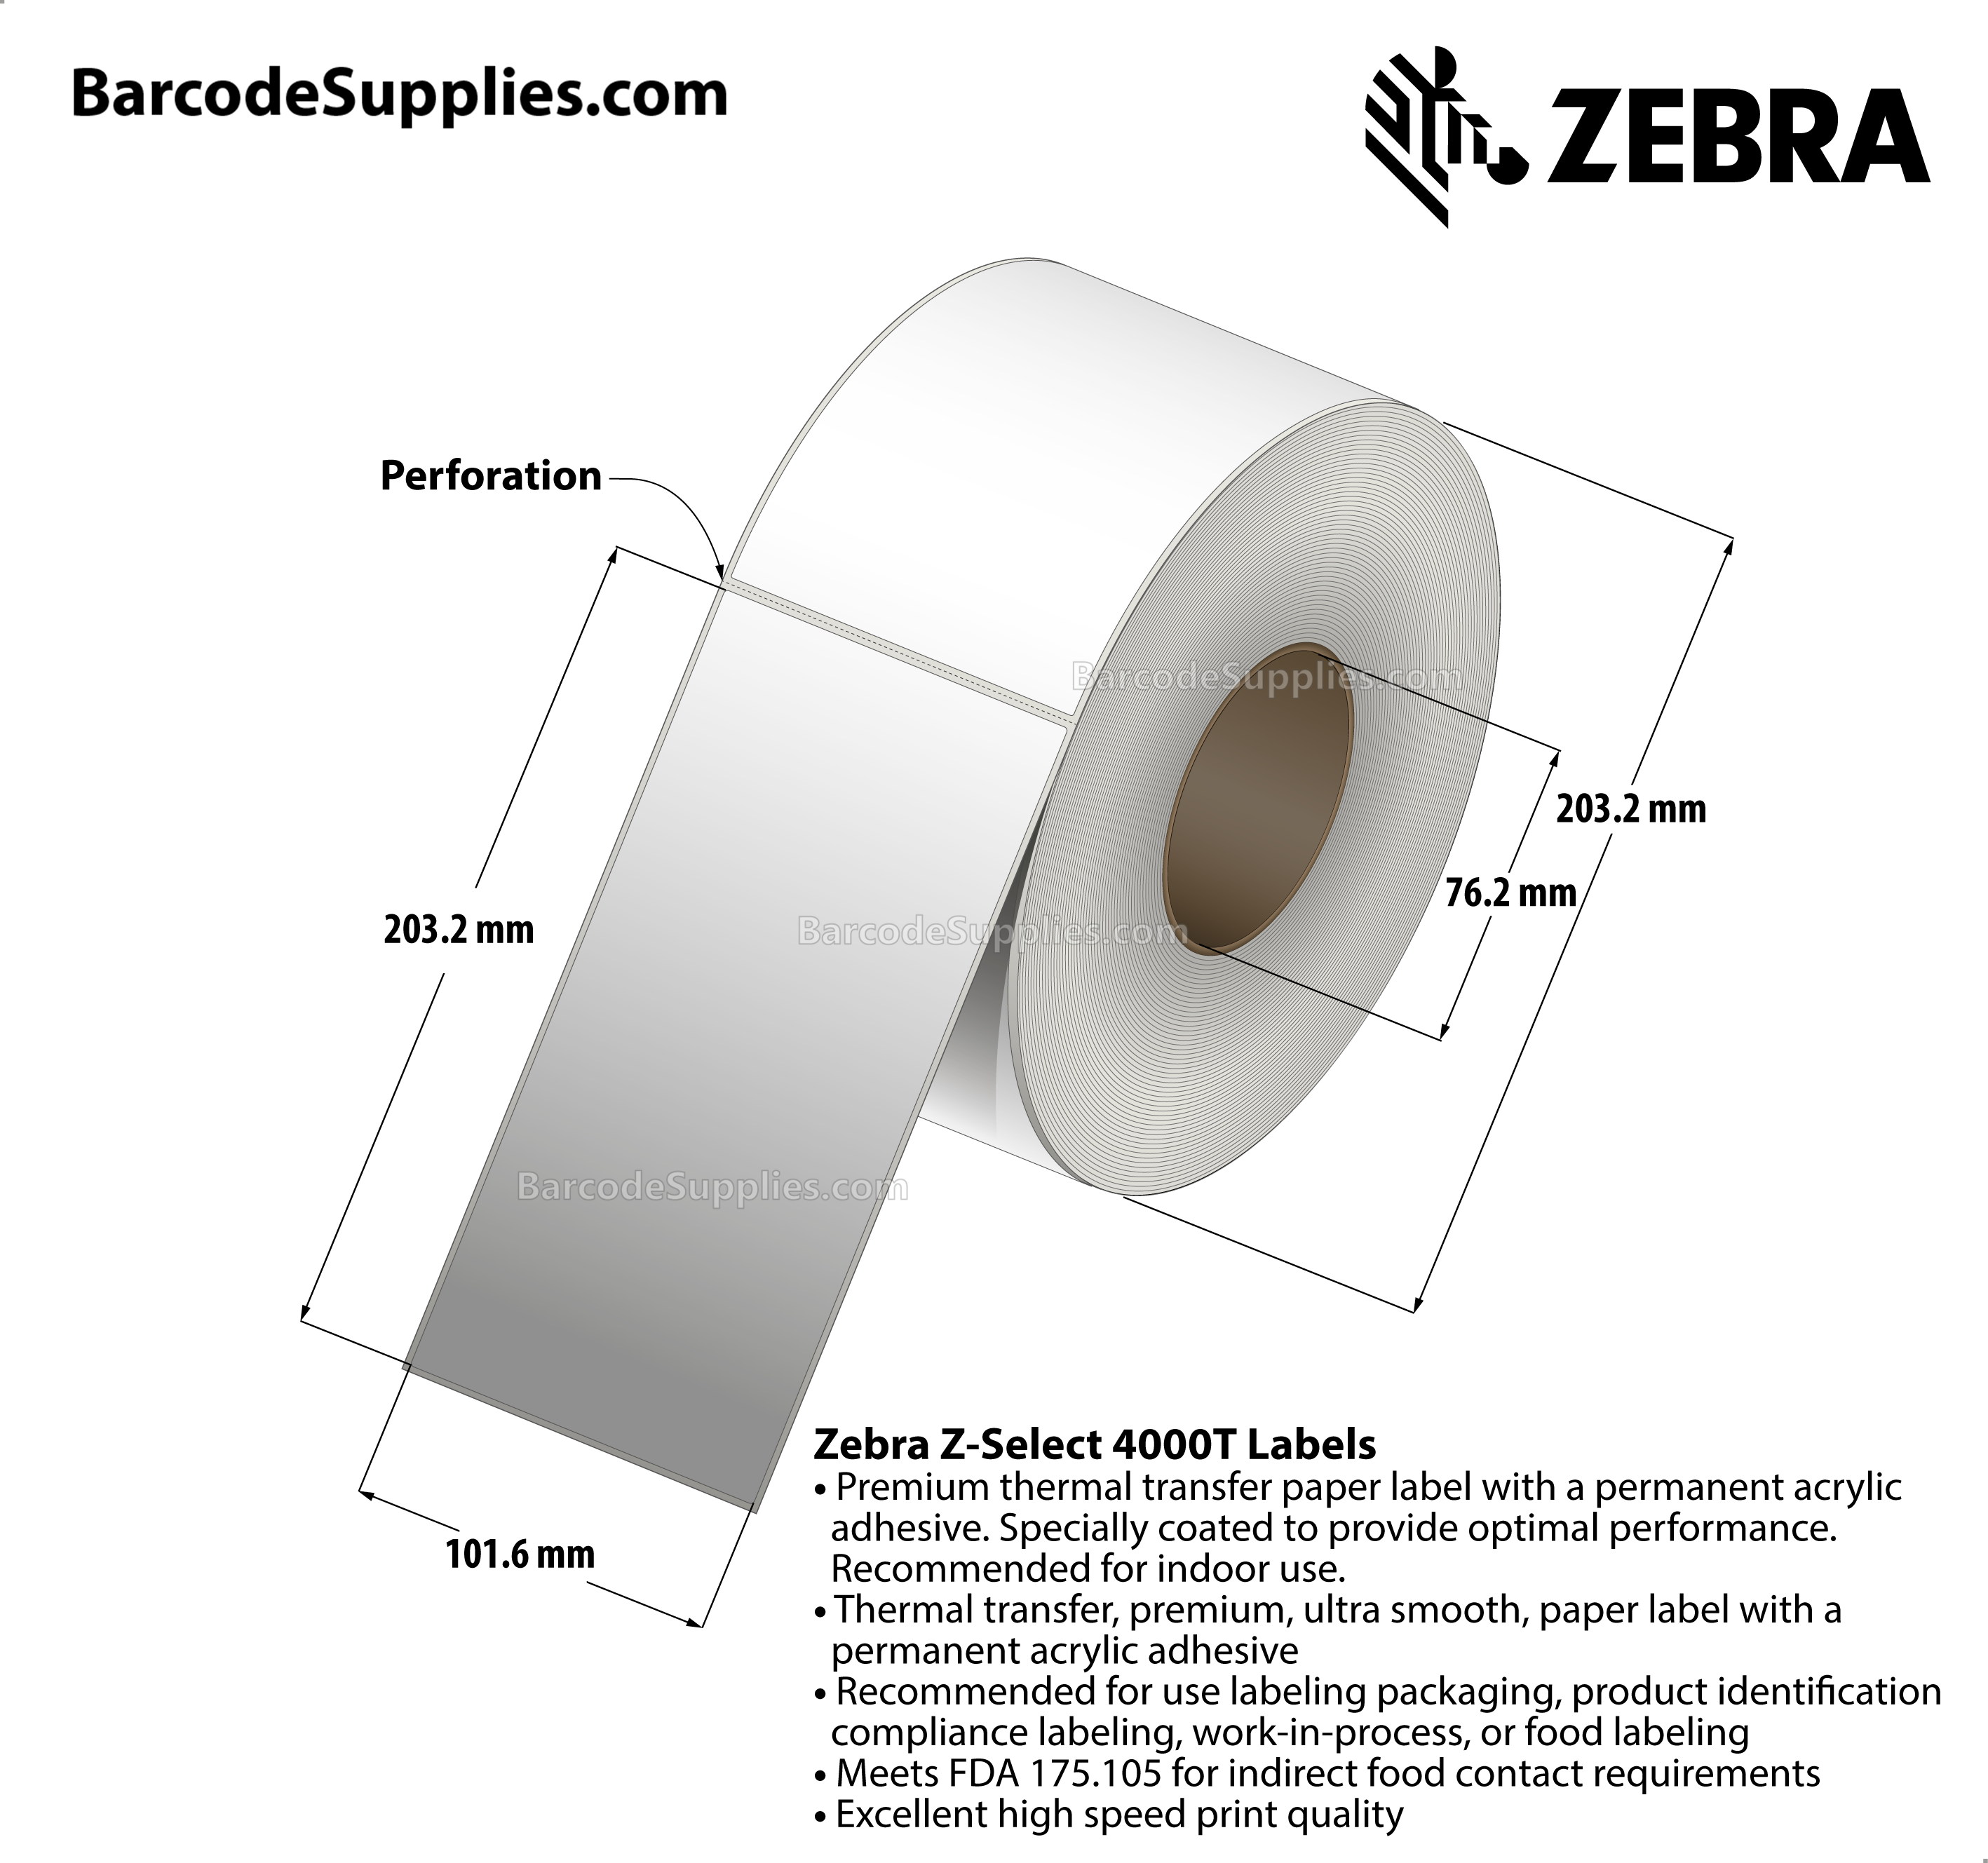 4 x 8 Thermal Transfer White Z-Select 4000T Labels With Permanent Adhesive - Perforated - 690 Labels Per Roll - Carton Of 4 Rolls - 2760 Labels Total - MPN: 98963